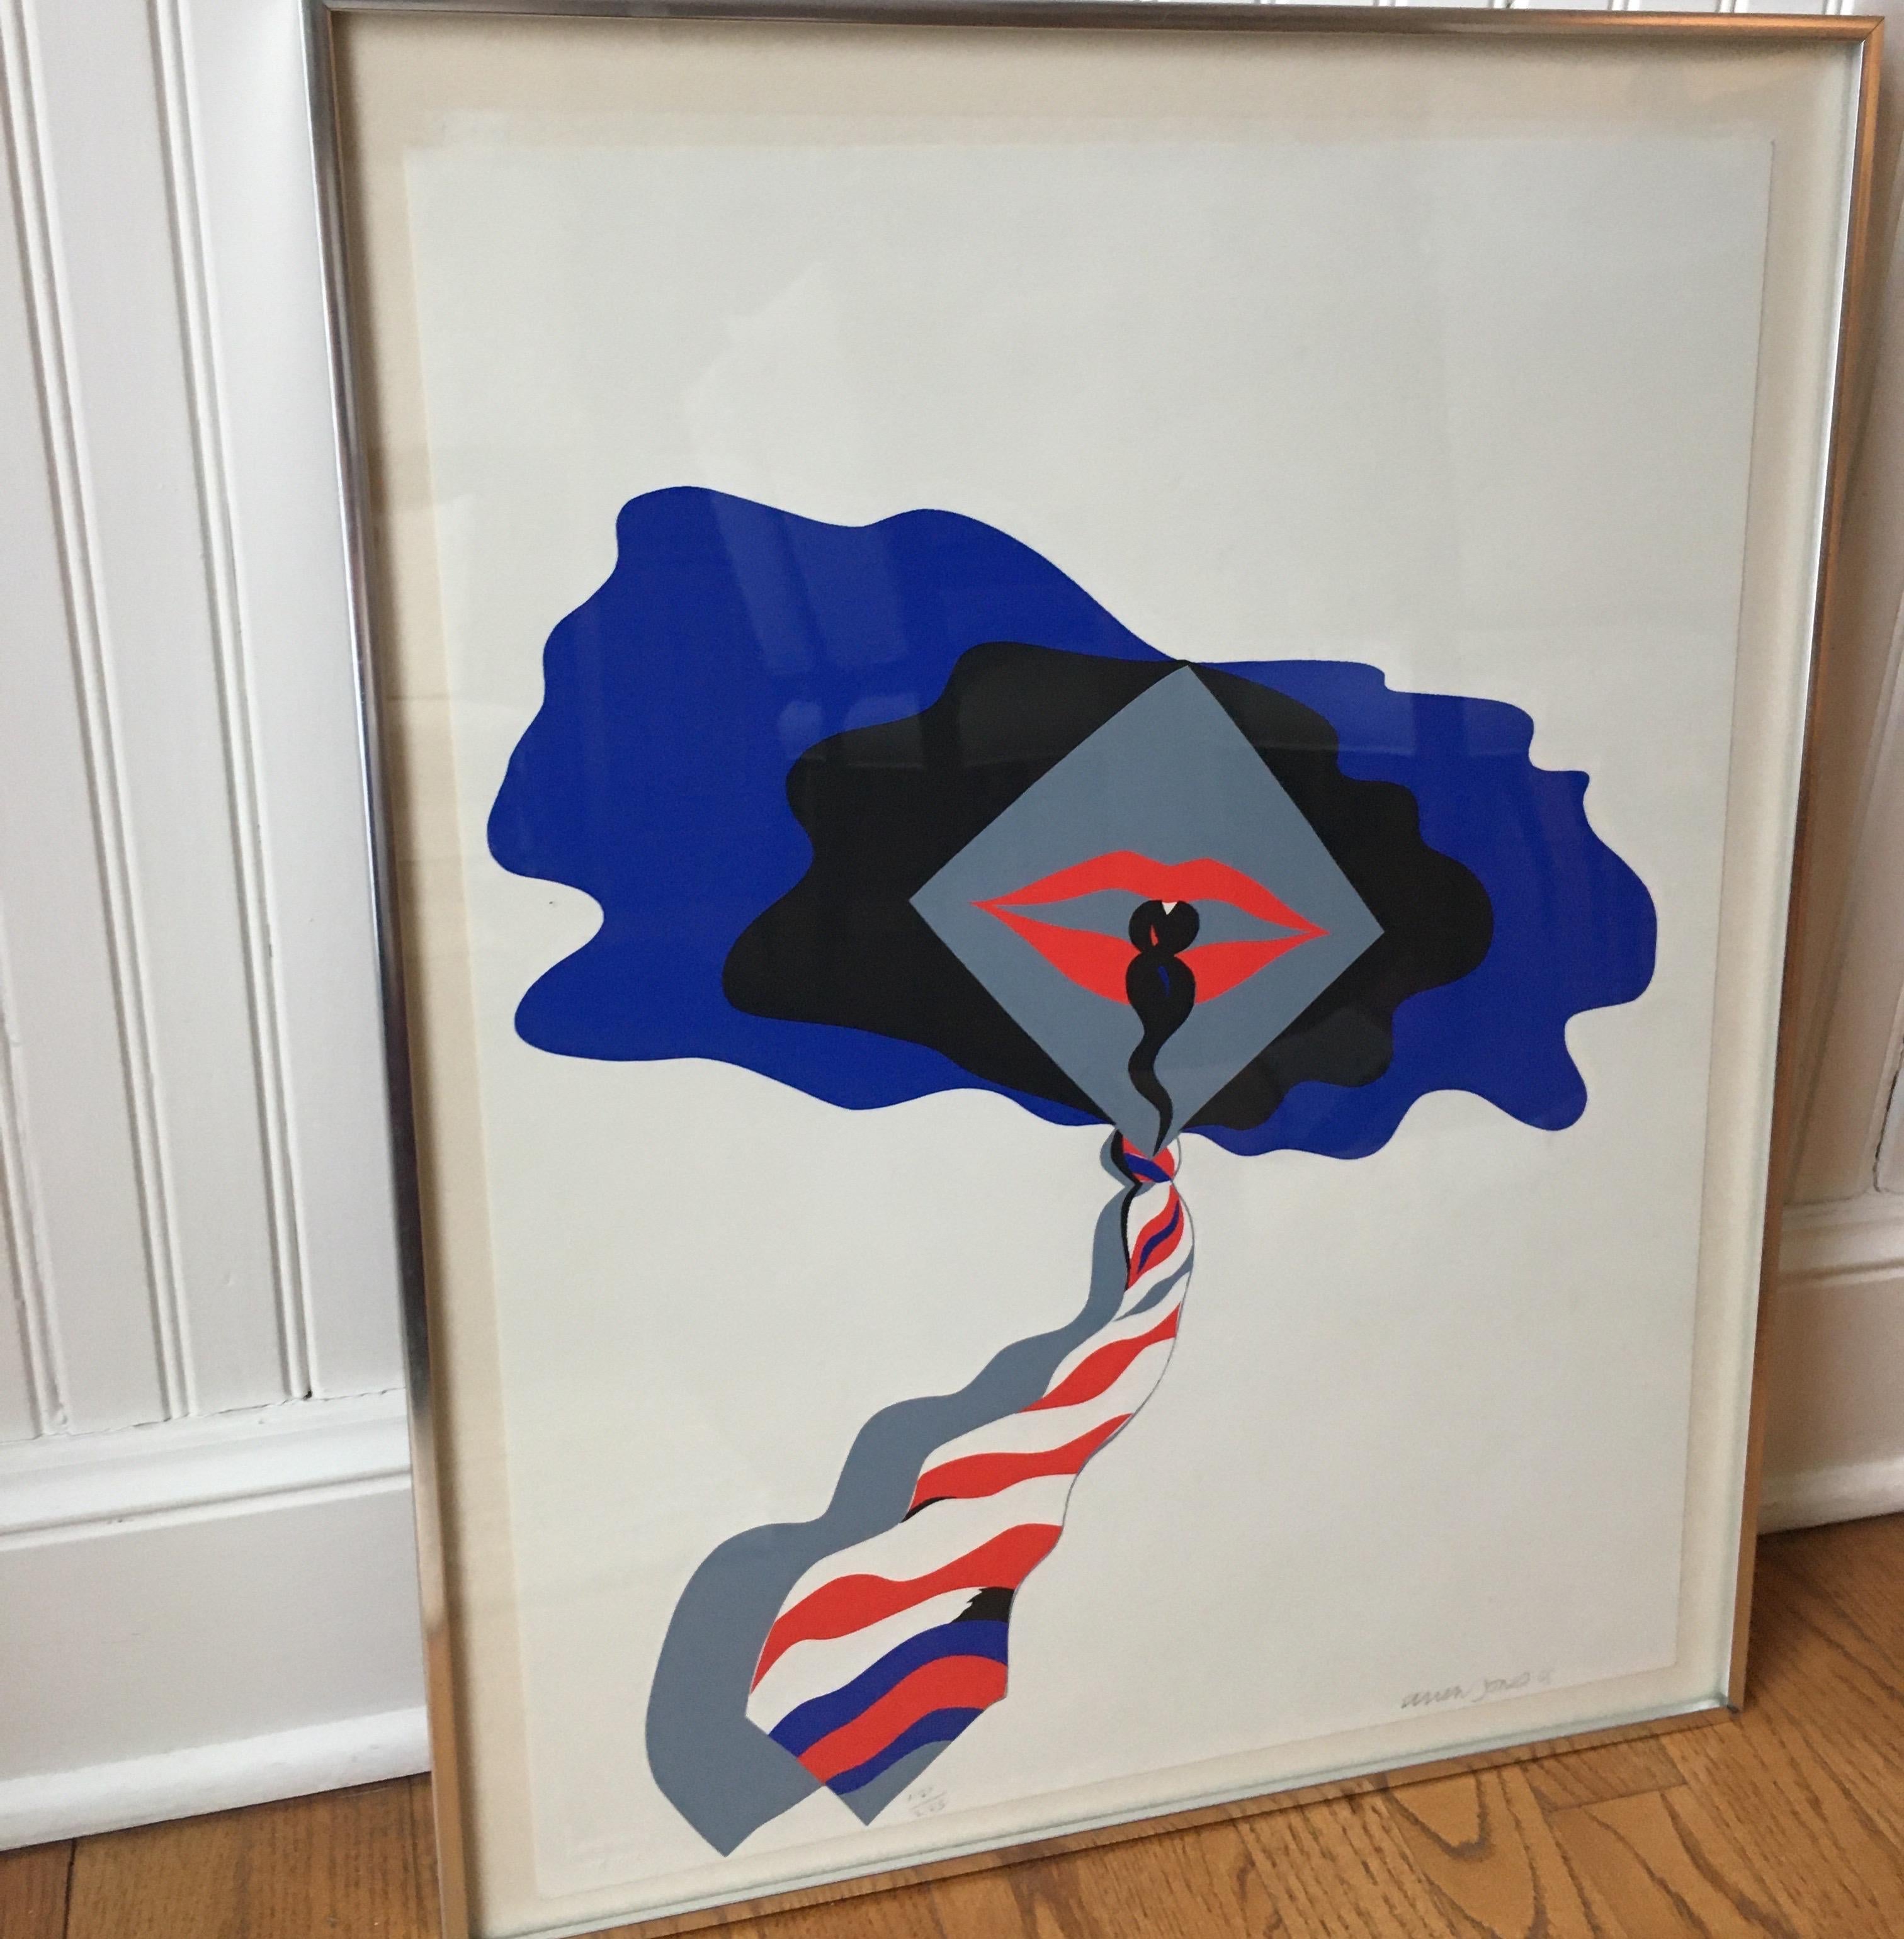 Paper Allen Jones Handed Signed and Numbered Serigraph “Self” For Sale